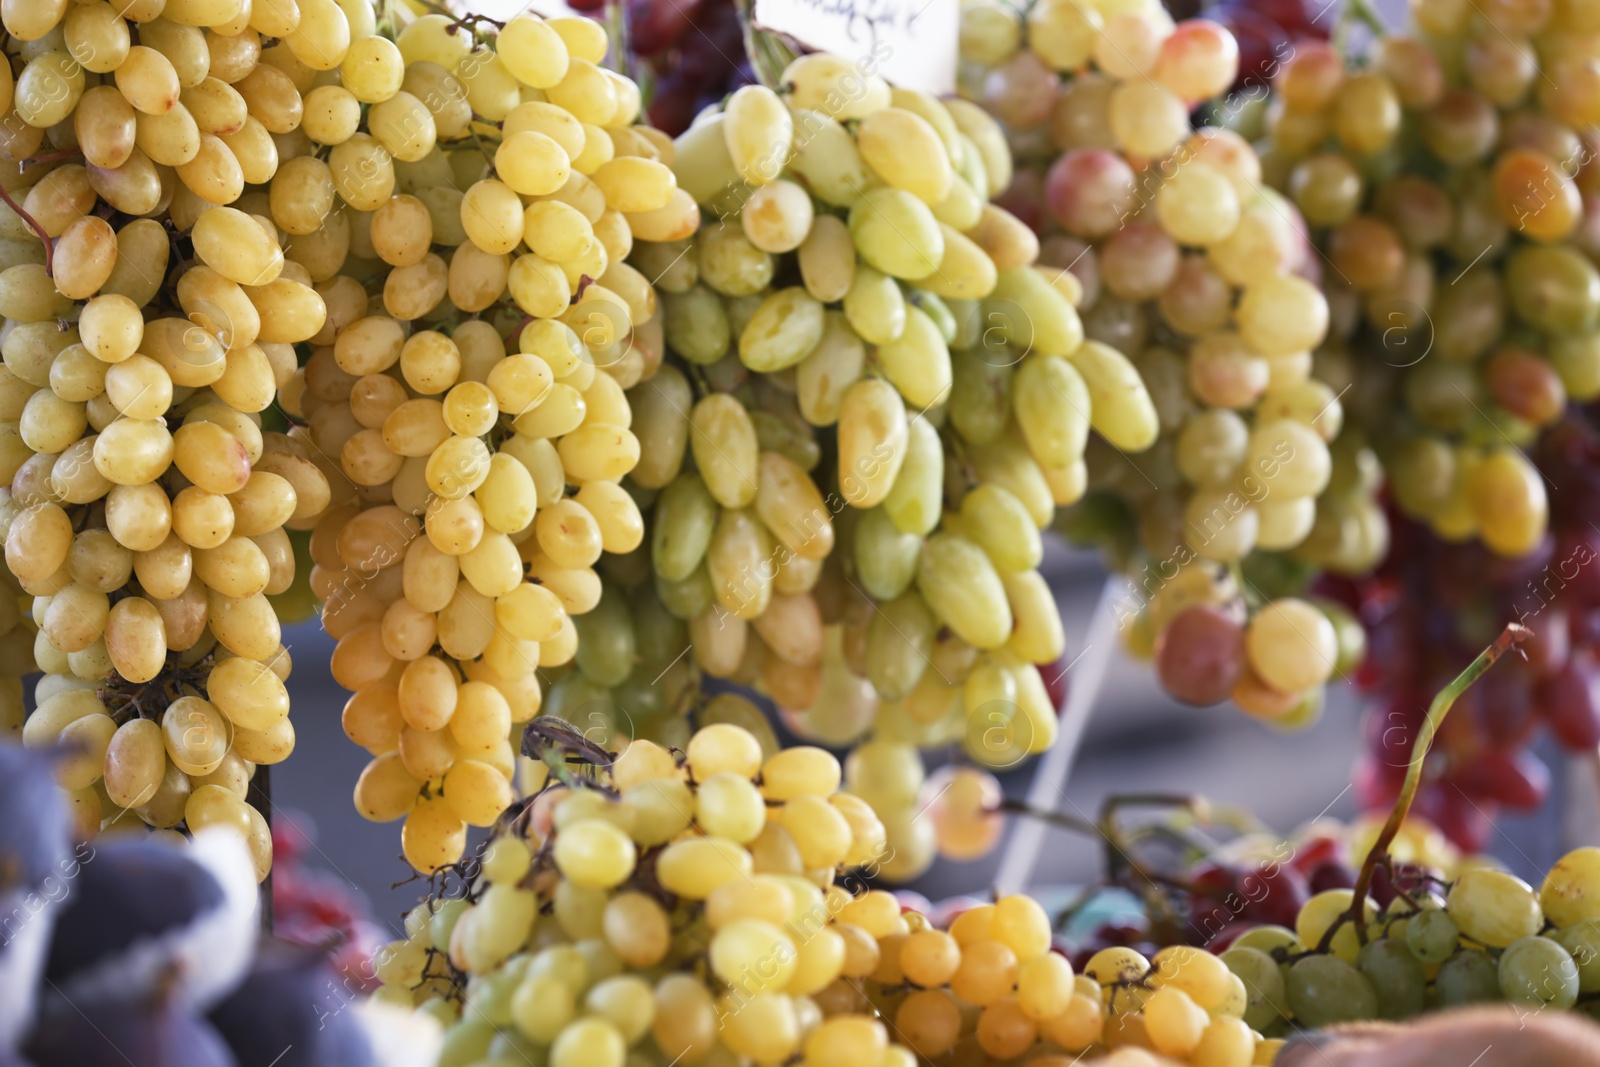 Photo of Fresh ripe juicy grapes against blurred background